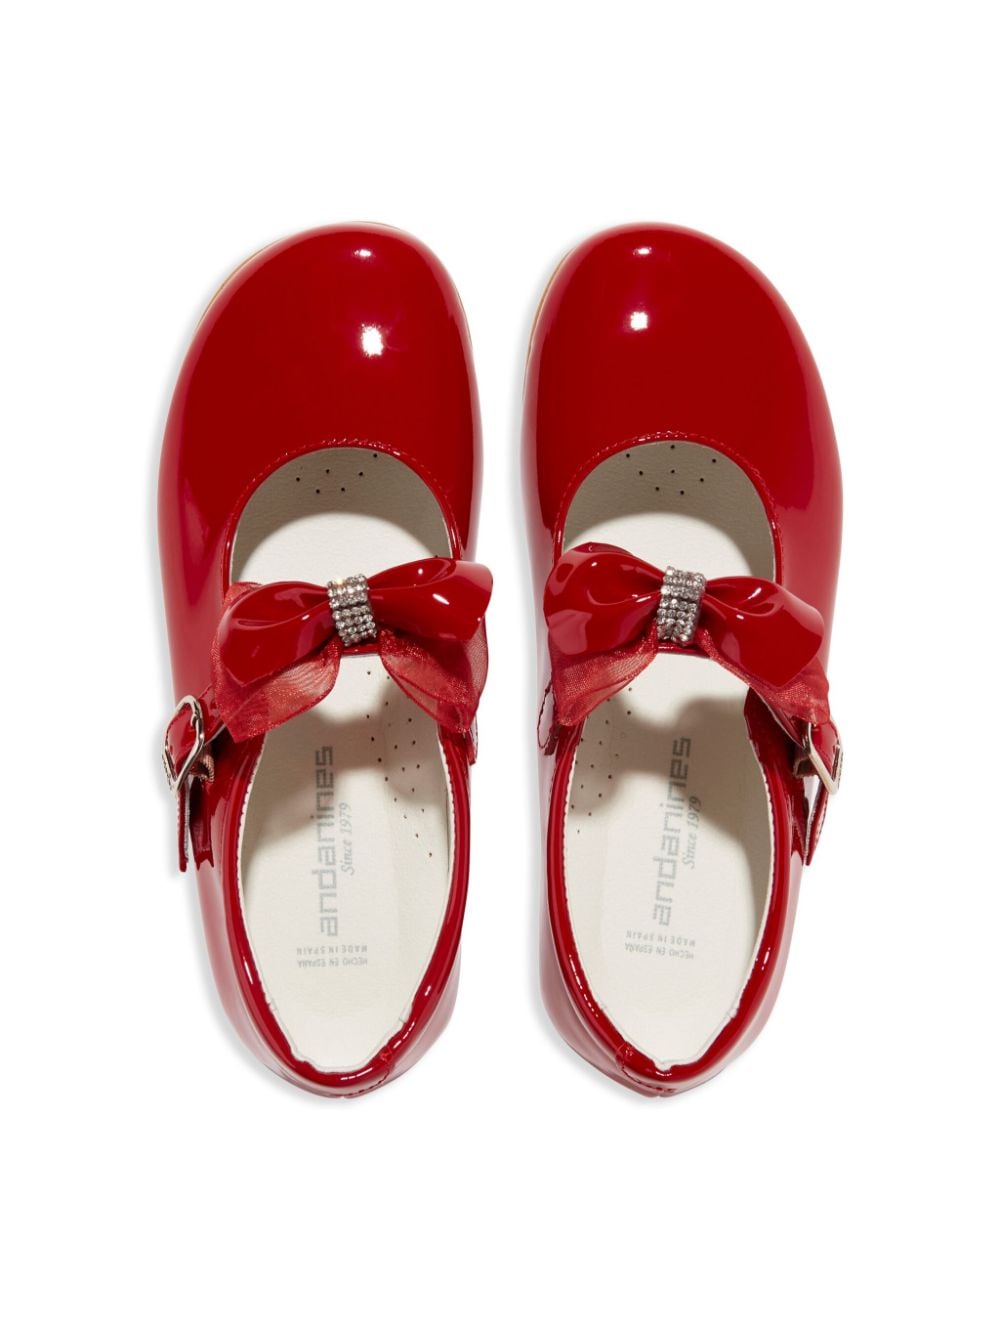 BOW PATENT BALLERINA SHOES